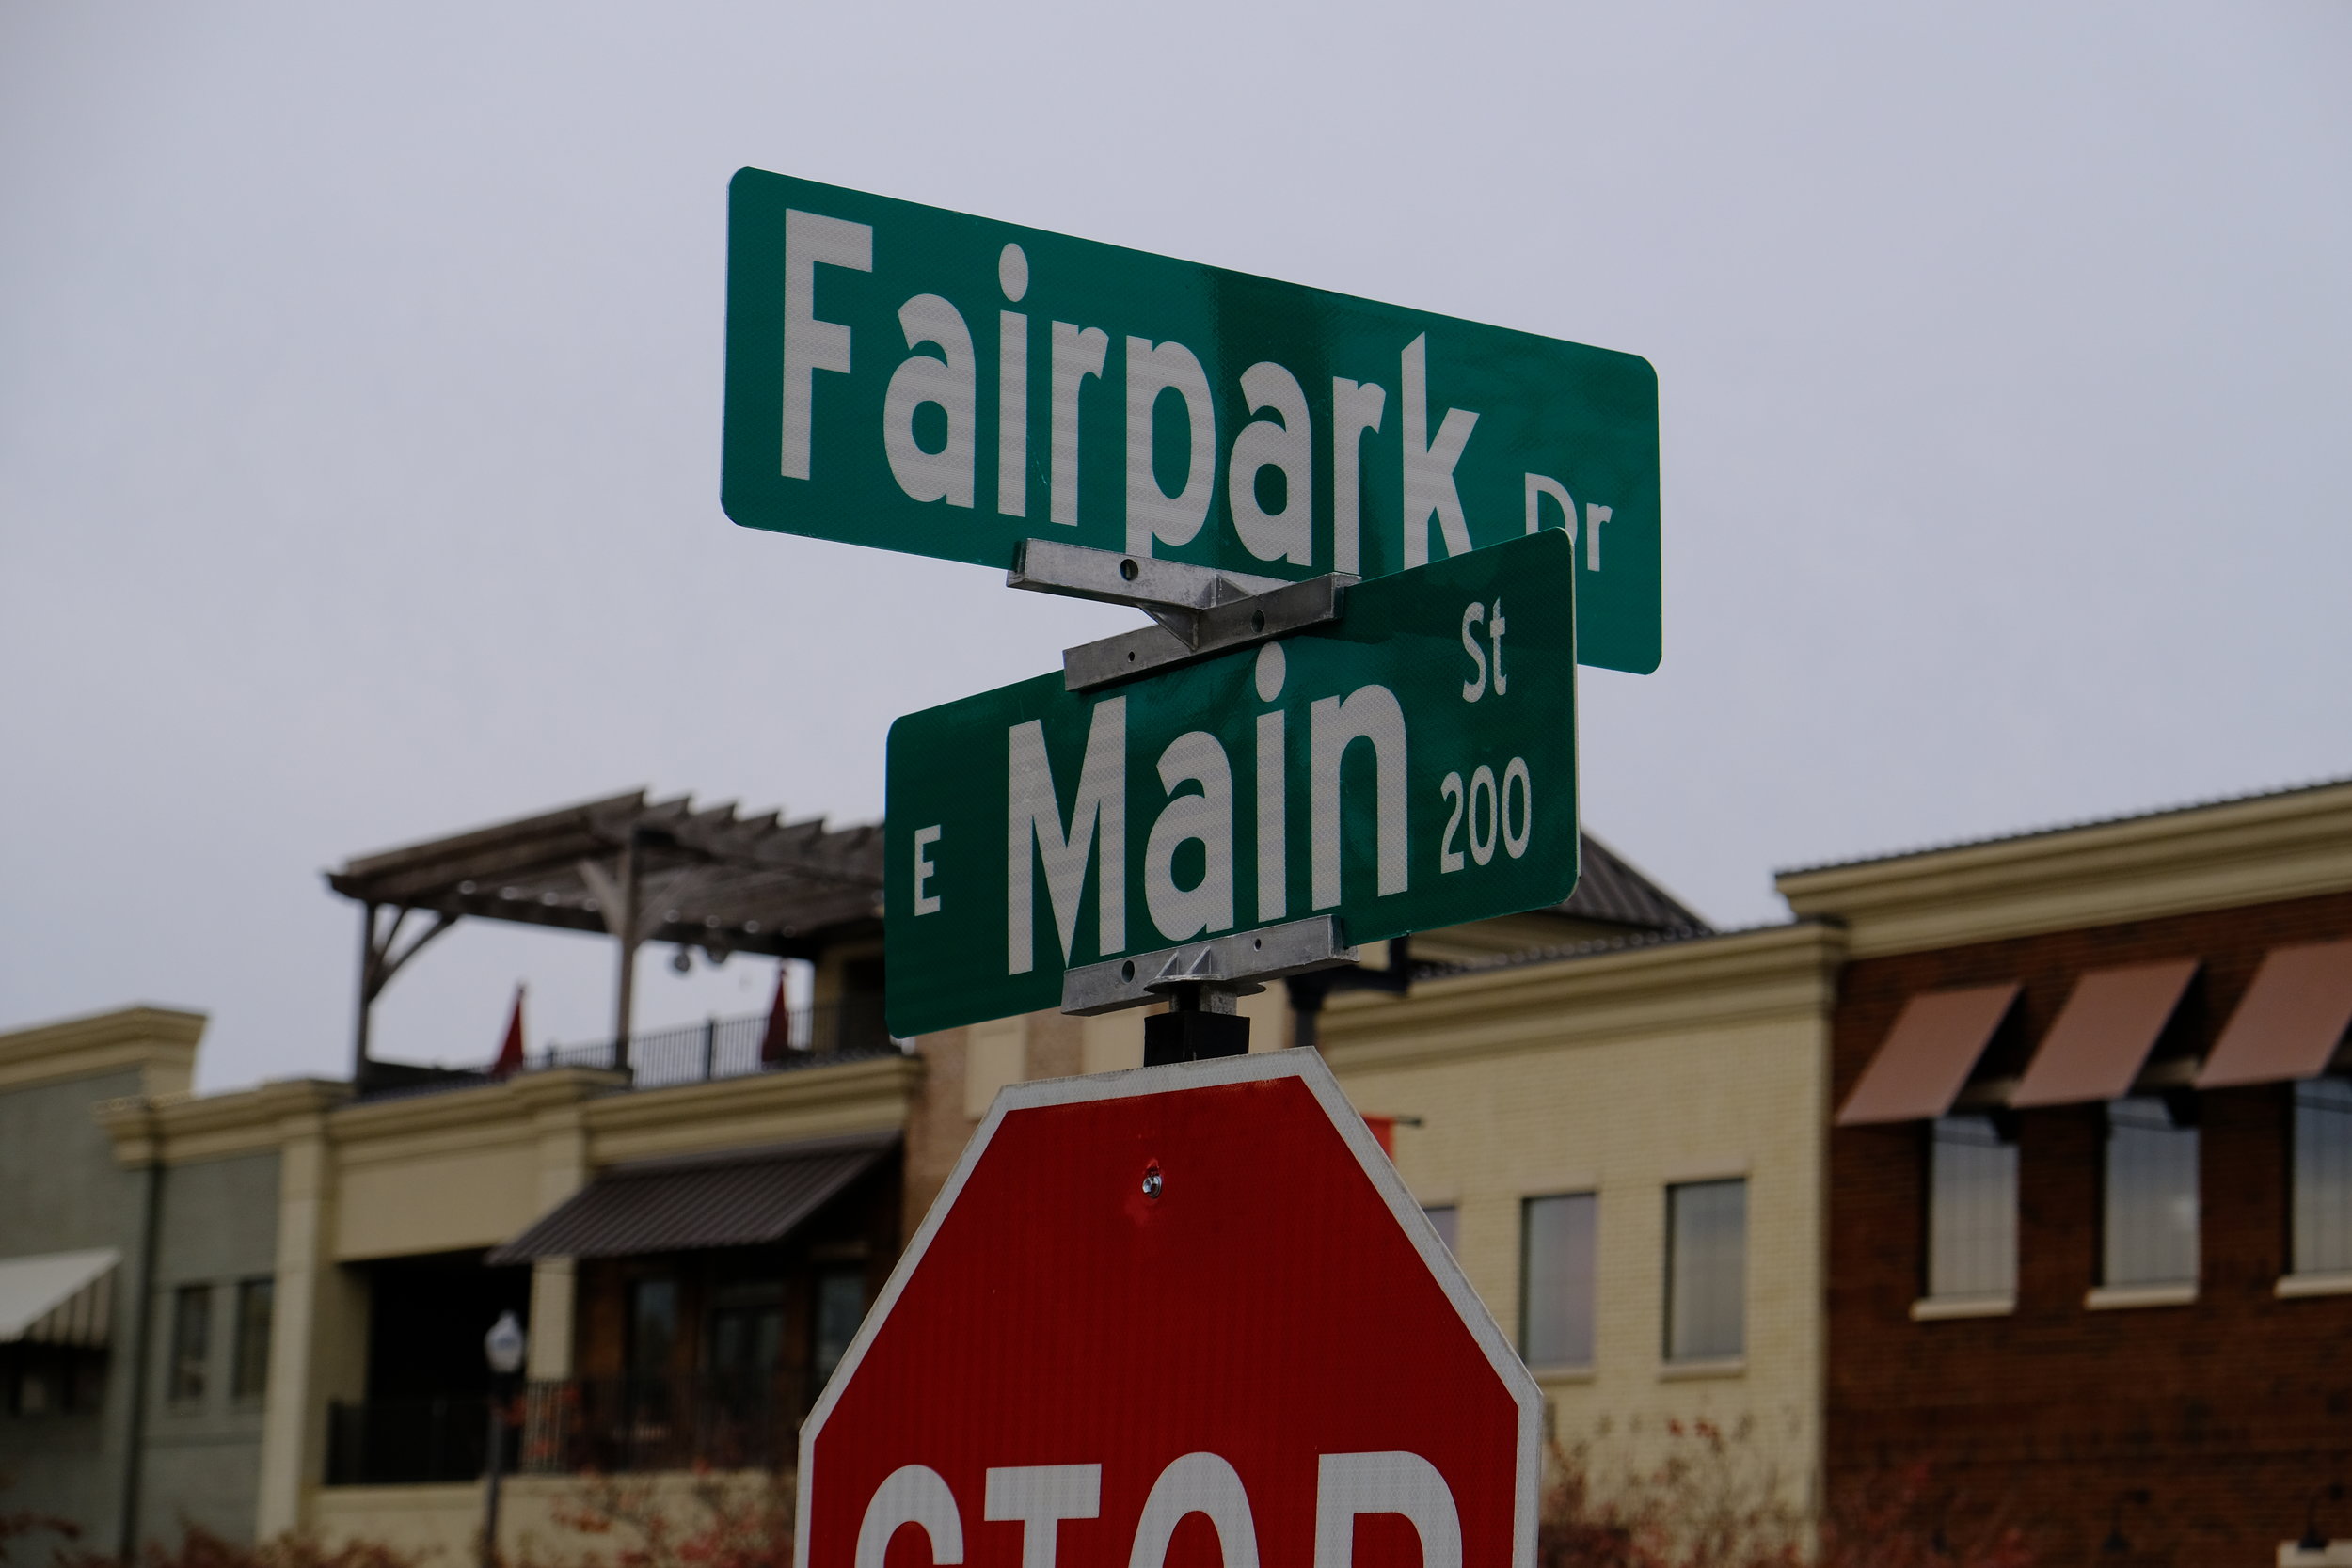 Sign on the Corner of Fairpark and Main